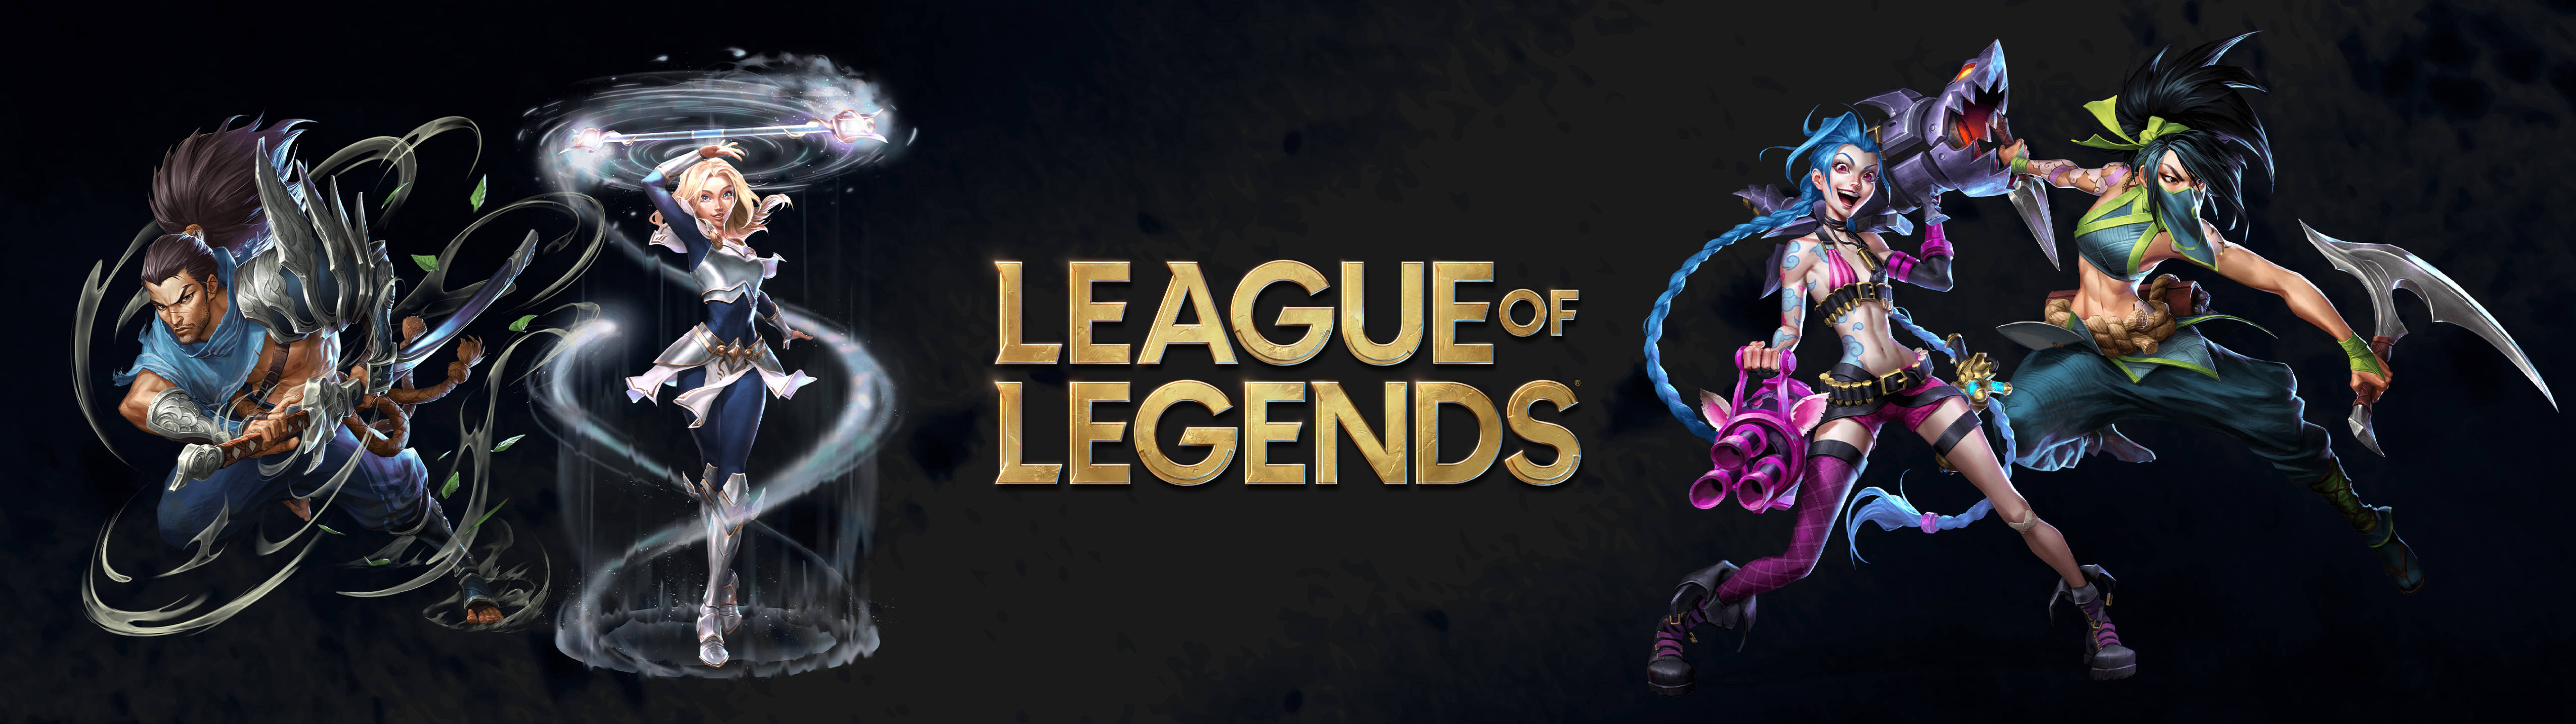 League Of Legends 5120x1440 Gaming